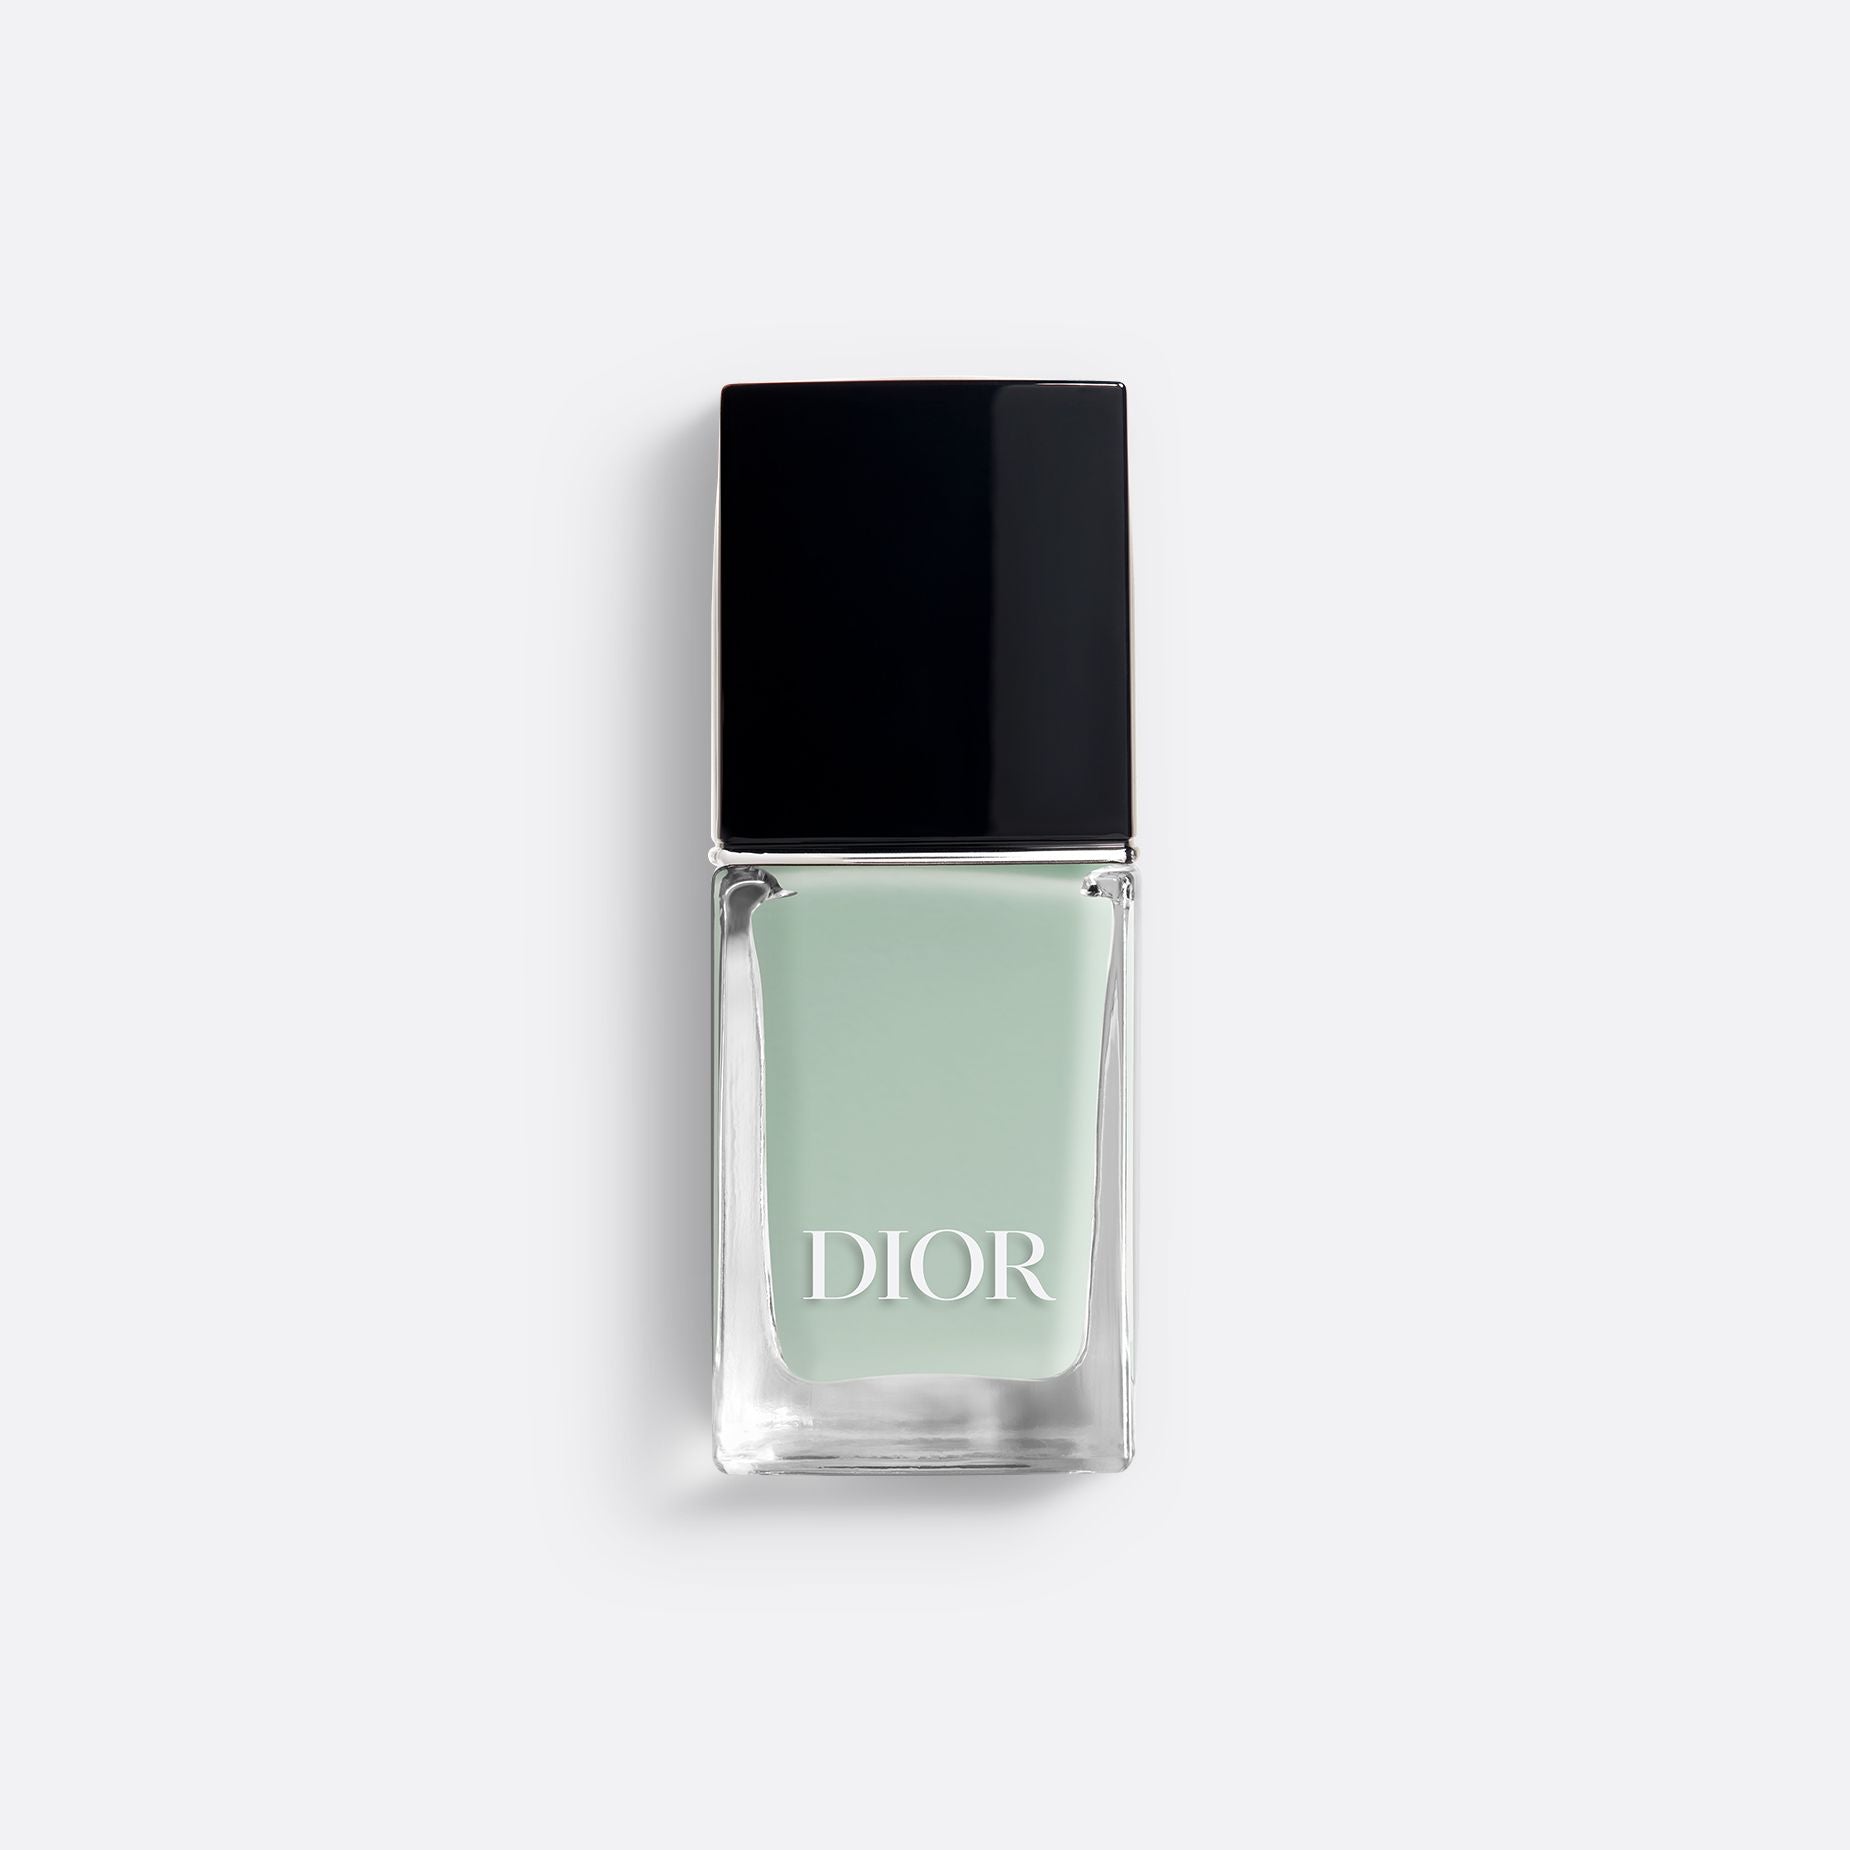 DIOR VERNIS ~ Nail Polish - Couture Color - Shine and Long Wear - Gel Effect - Protective Nail Care - Limited Edition